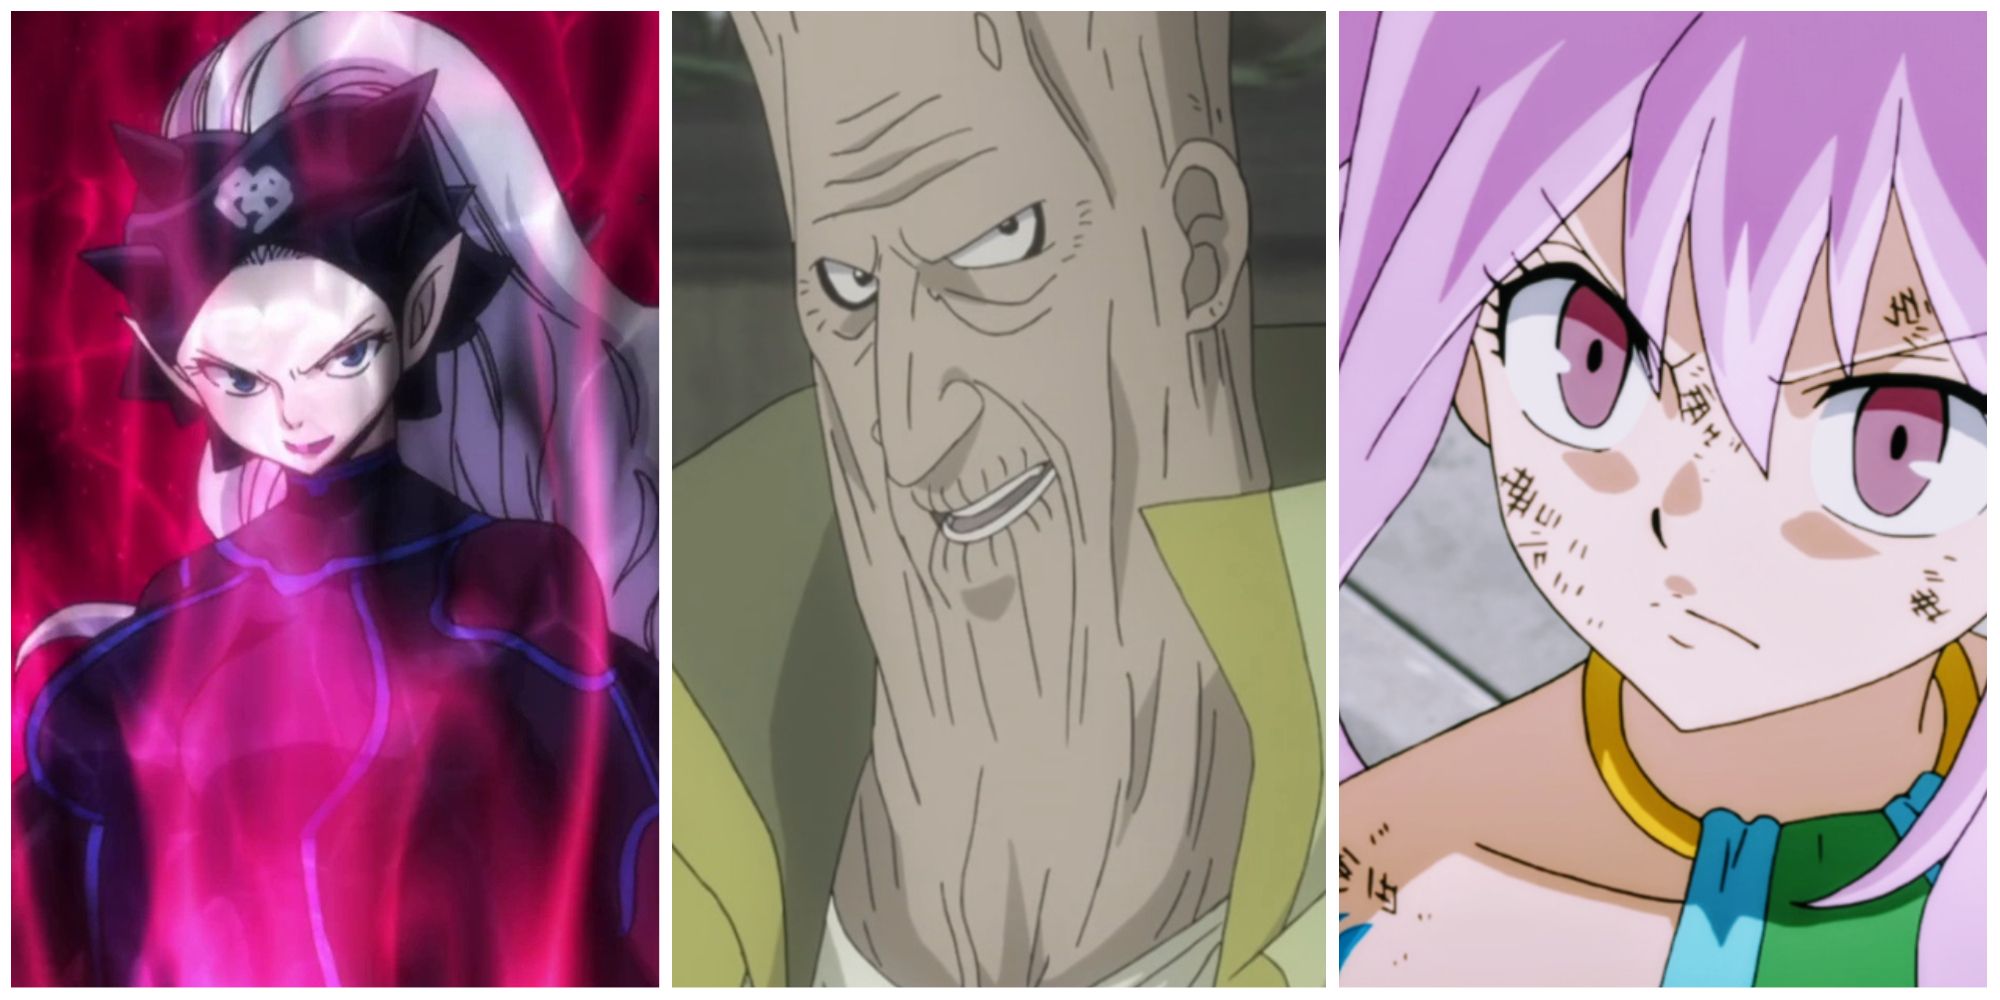 Headshots of Mirajane Strauss, Warrod Sequen, and Wendy Marvell placed parallely.